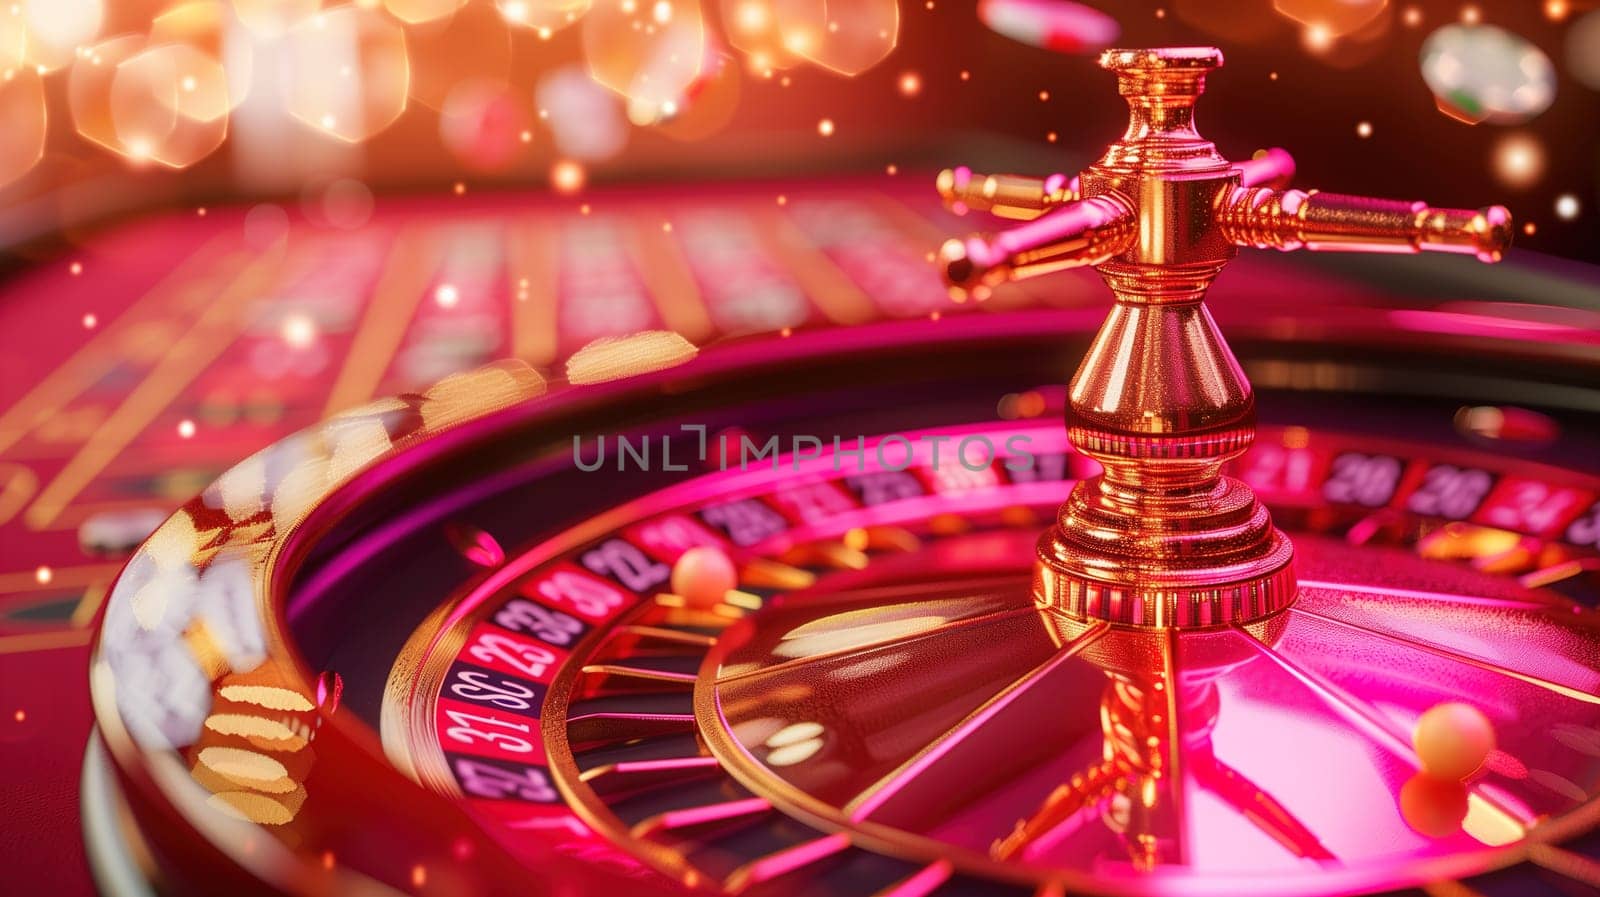 A casino roulette wheel with a gleaming golden cross perched on top, symbolizing the fusion of gambling and religious elements. The contrast between the sacred cross and the game of chance creates a striking visual impact.